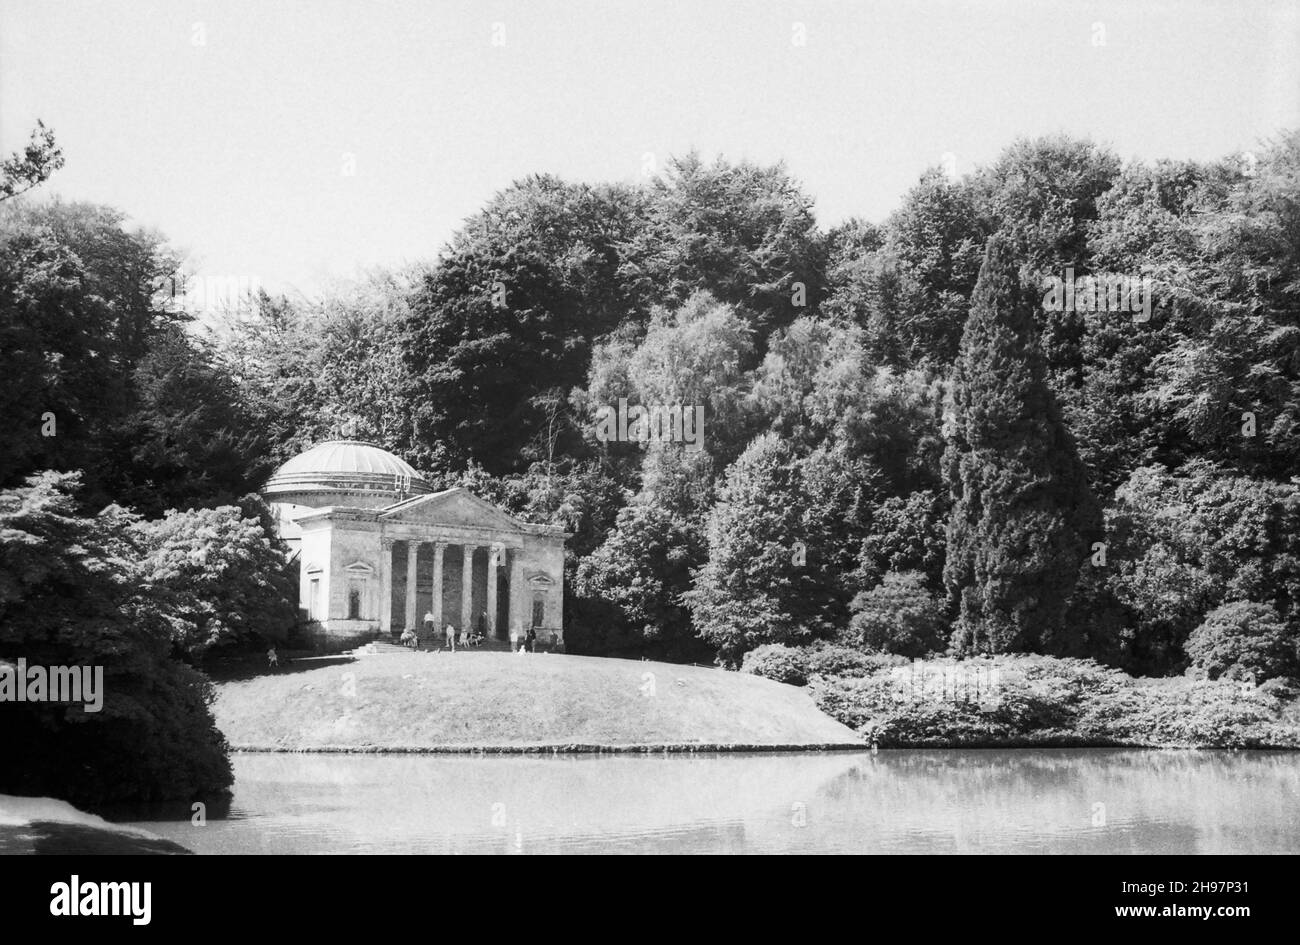 High Summer at Stourhead Garden, Stourton, Wiltshire, UK, showing the Pantheon, designed by Henry Flitcroft and built in 1753, on the opposite bank of the lake. Black and white archive film photograph from 1990 Stock Photo